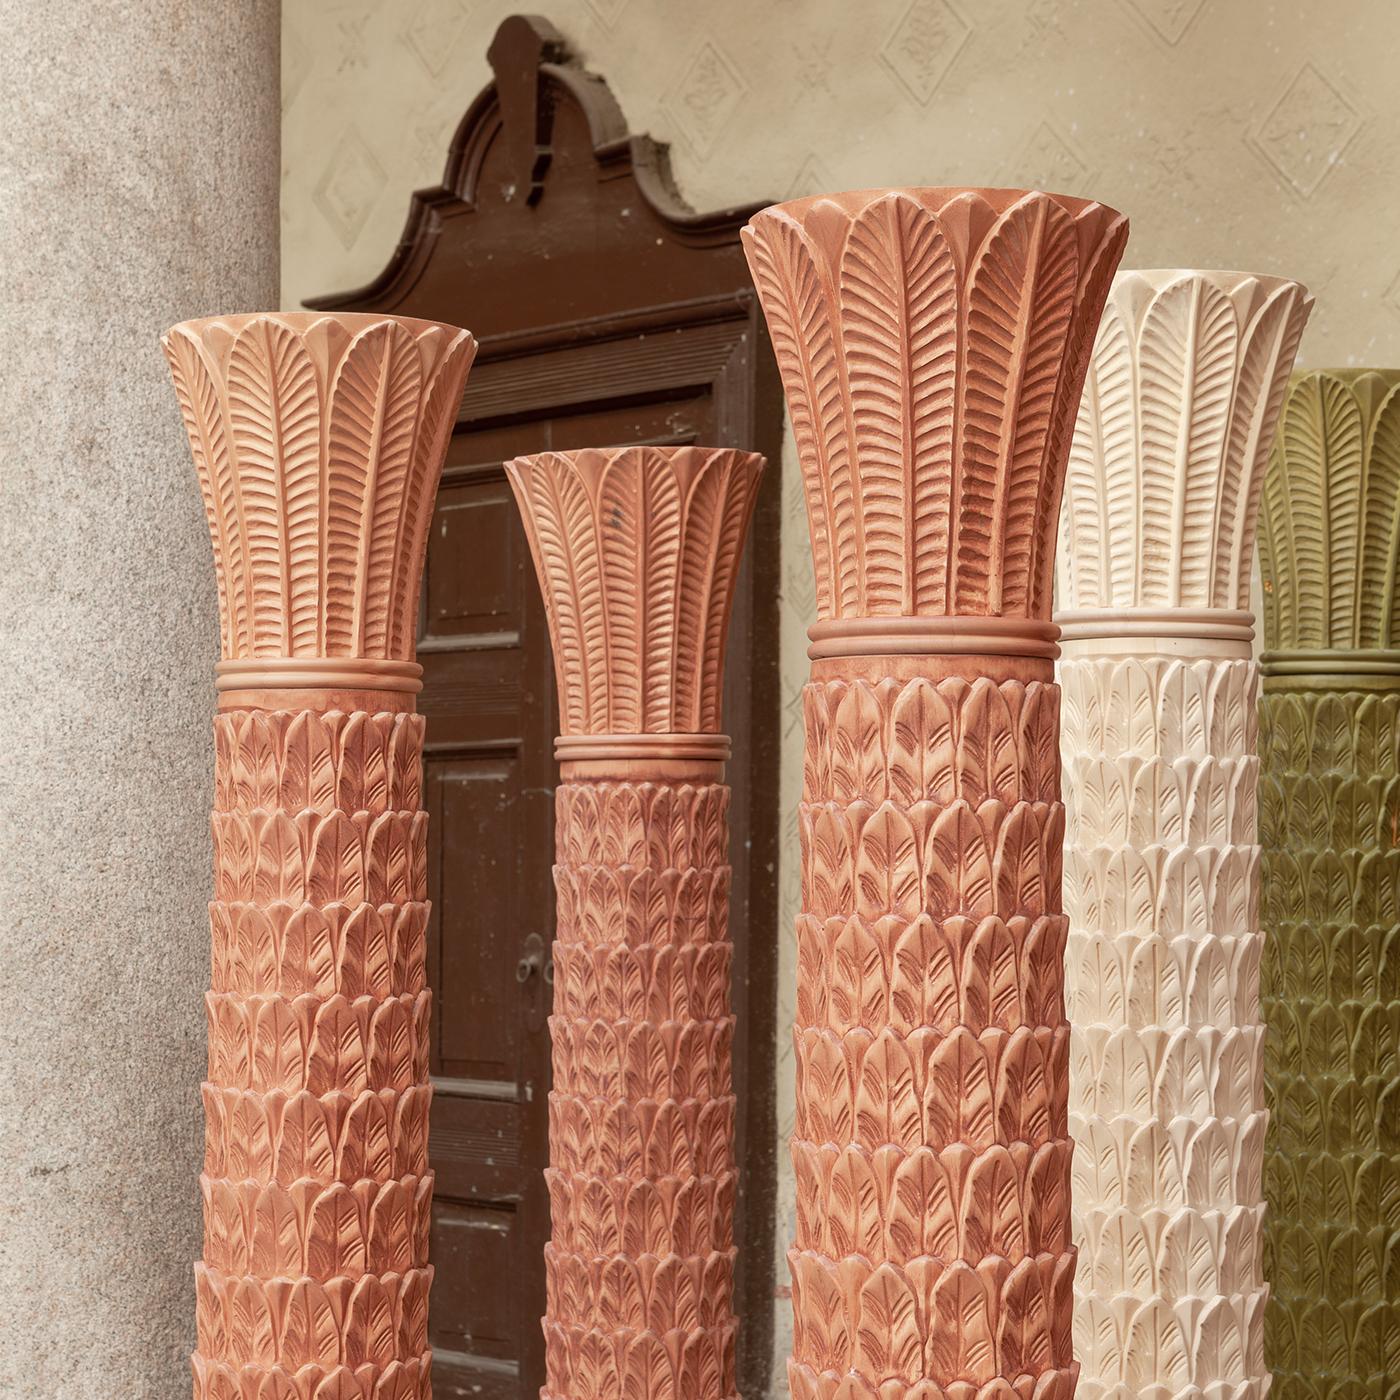 Delicate and refined, this decorative column merges modern techniques with centuries-old carving woodworking traditions. Its singular style draws inspiration from 1920s Art Deco flair and Renaissance and Ancient Egyptian art, with colors inspired by